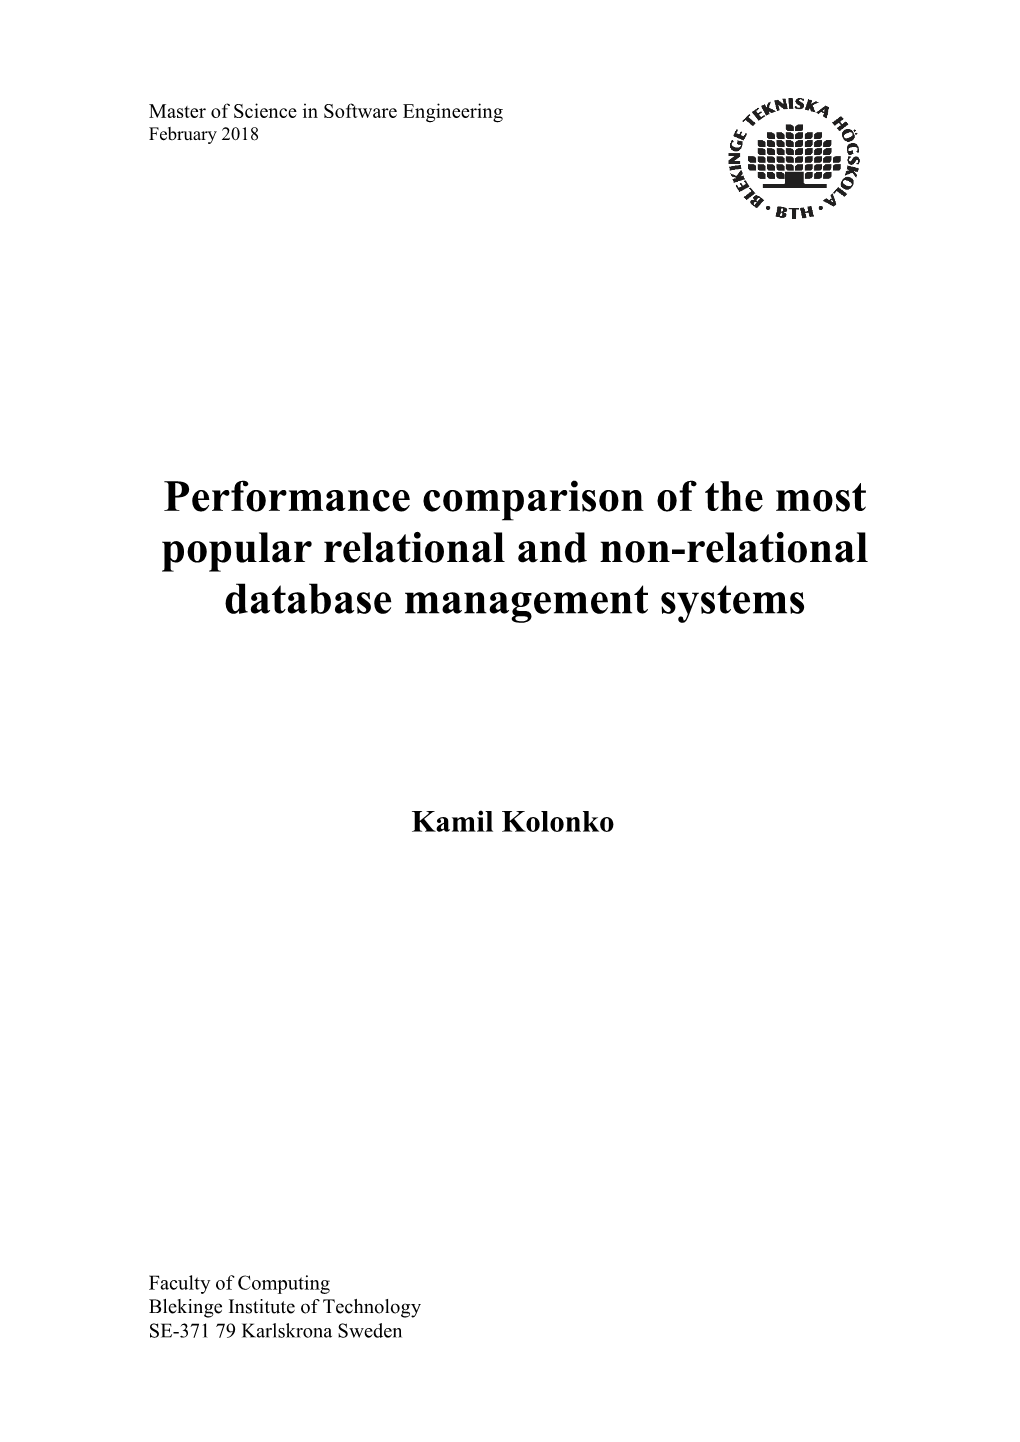 Performance Comparison of the Most Popular Relational and Non-Relational Database Management Systems